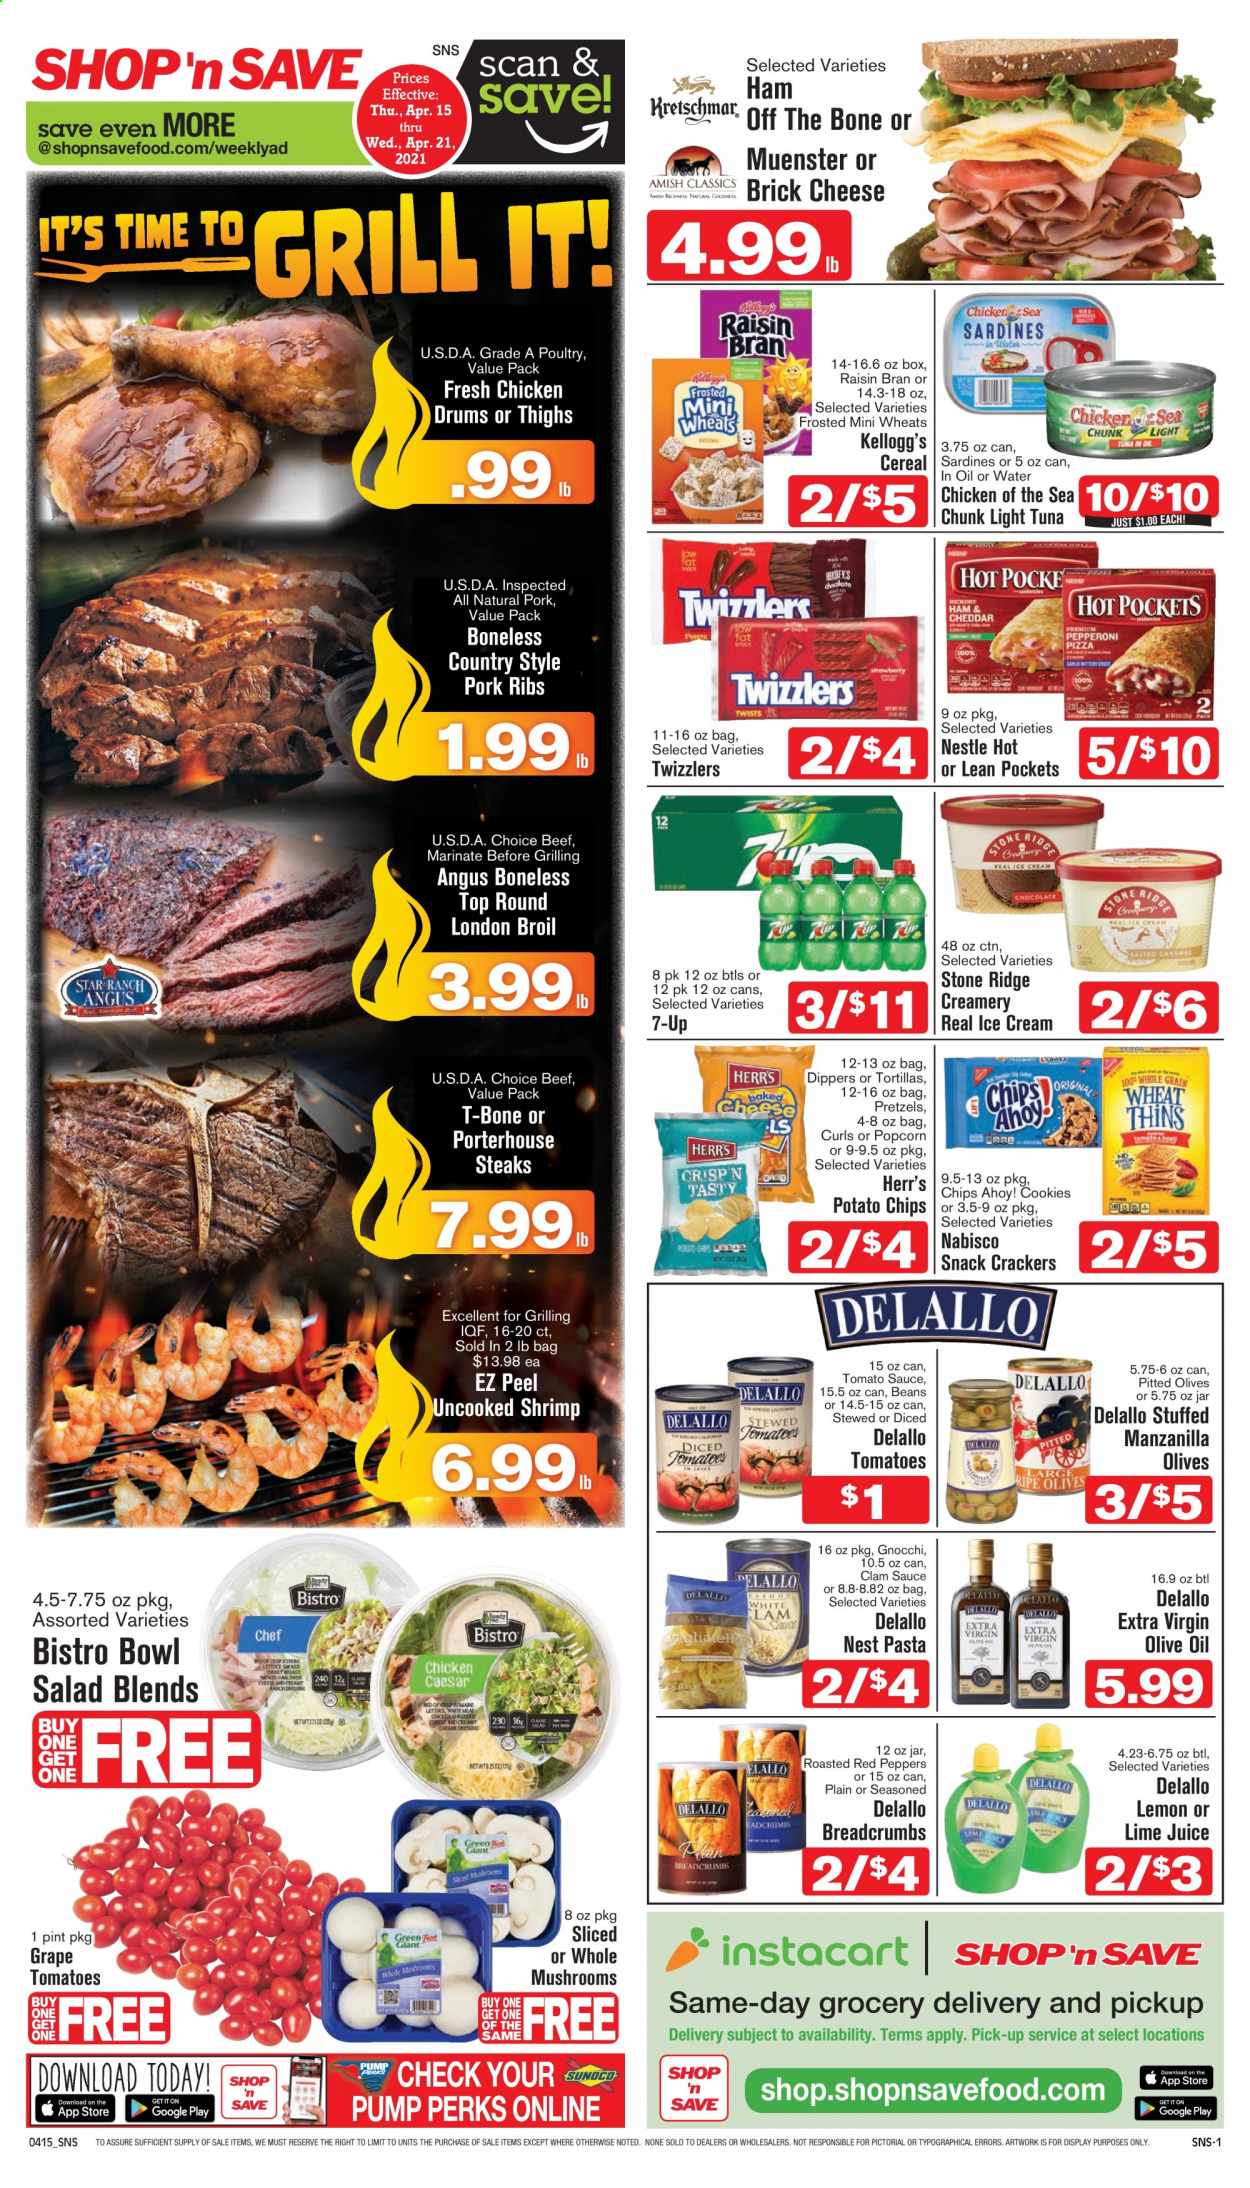 thumbnail - Shop ‘n Save Flyer - 04/15/2021 - 04/21/2021 - Sales products - tortillas, pretzels, breadcrumbs, beans, tomatoes, salad, peppers, beef meat, t-bone steak, steak, portehouse steak, pork meat, pork ribs, clams, sardines, tuna, shrimps, gnocchi, pizza, ham, pepperoni, brick cheese, Münster cheese, ice cream, cookies, Nestlé, snack, crackers, Kellogg's, Chips Ahoy!, potato chips, chips, Thins, popcorn, tomato sauce, olives, light tuna, Chicken of the Sea, cereals, Raisin Bran, pasta, extra virgin olive oil, olive oil, 7UP. Page 1.